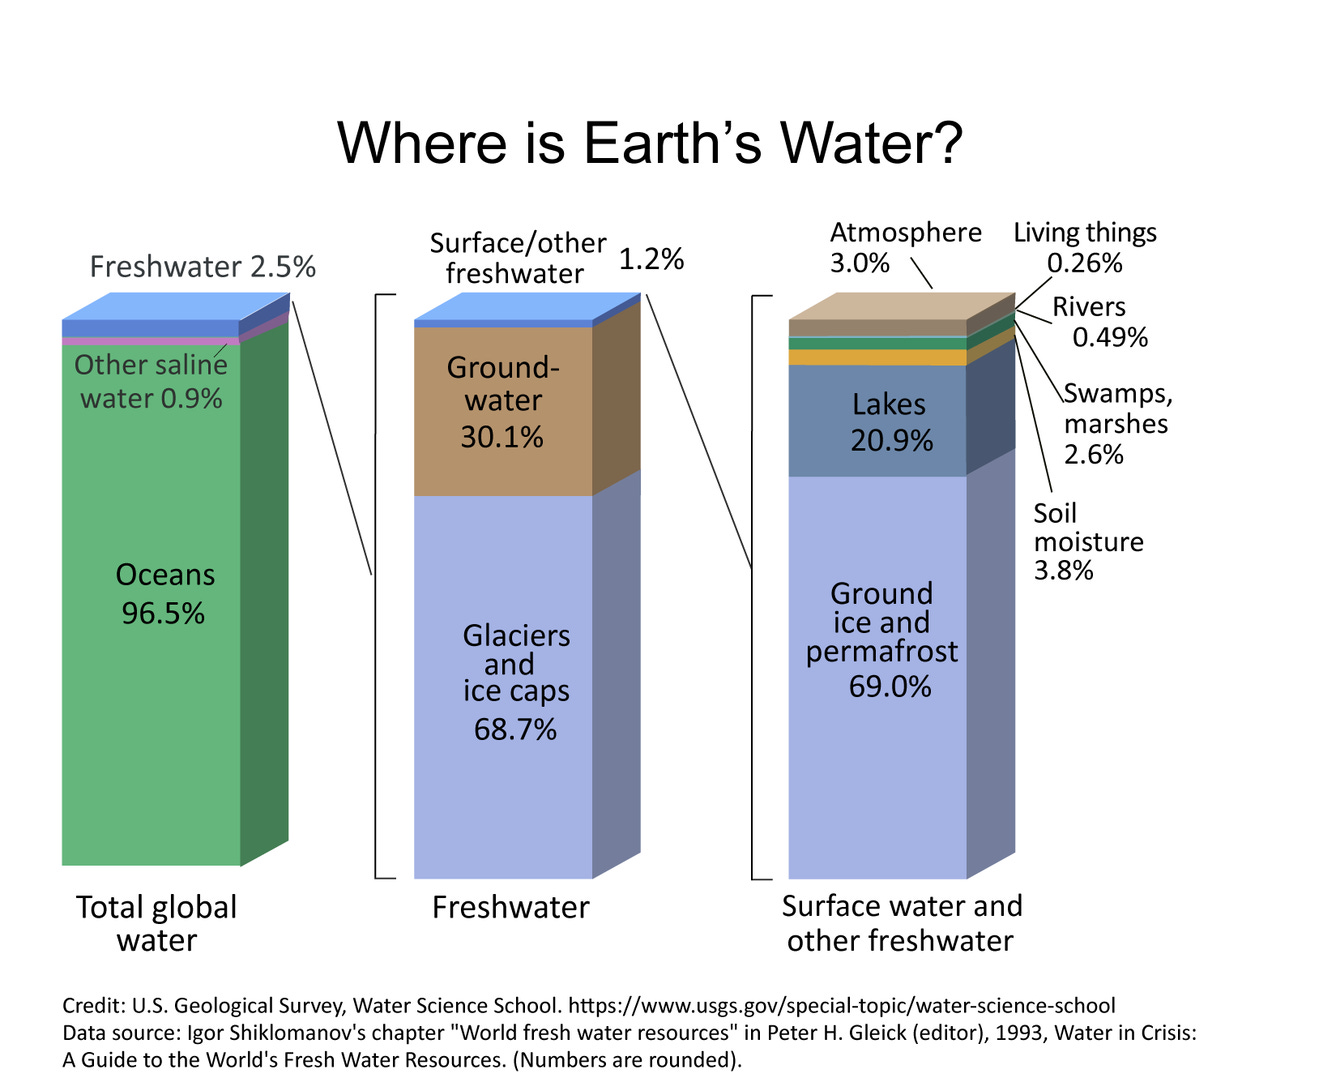 The distribution of water on, in, and above the Earth